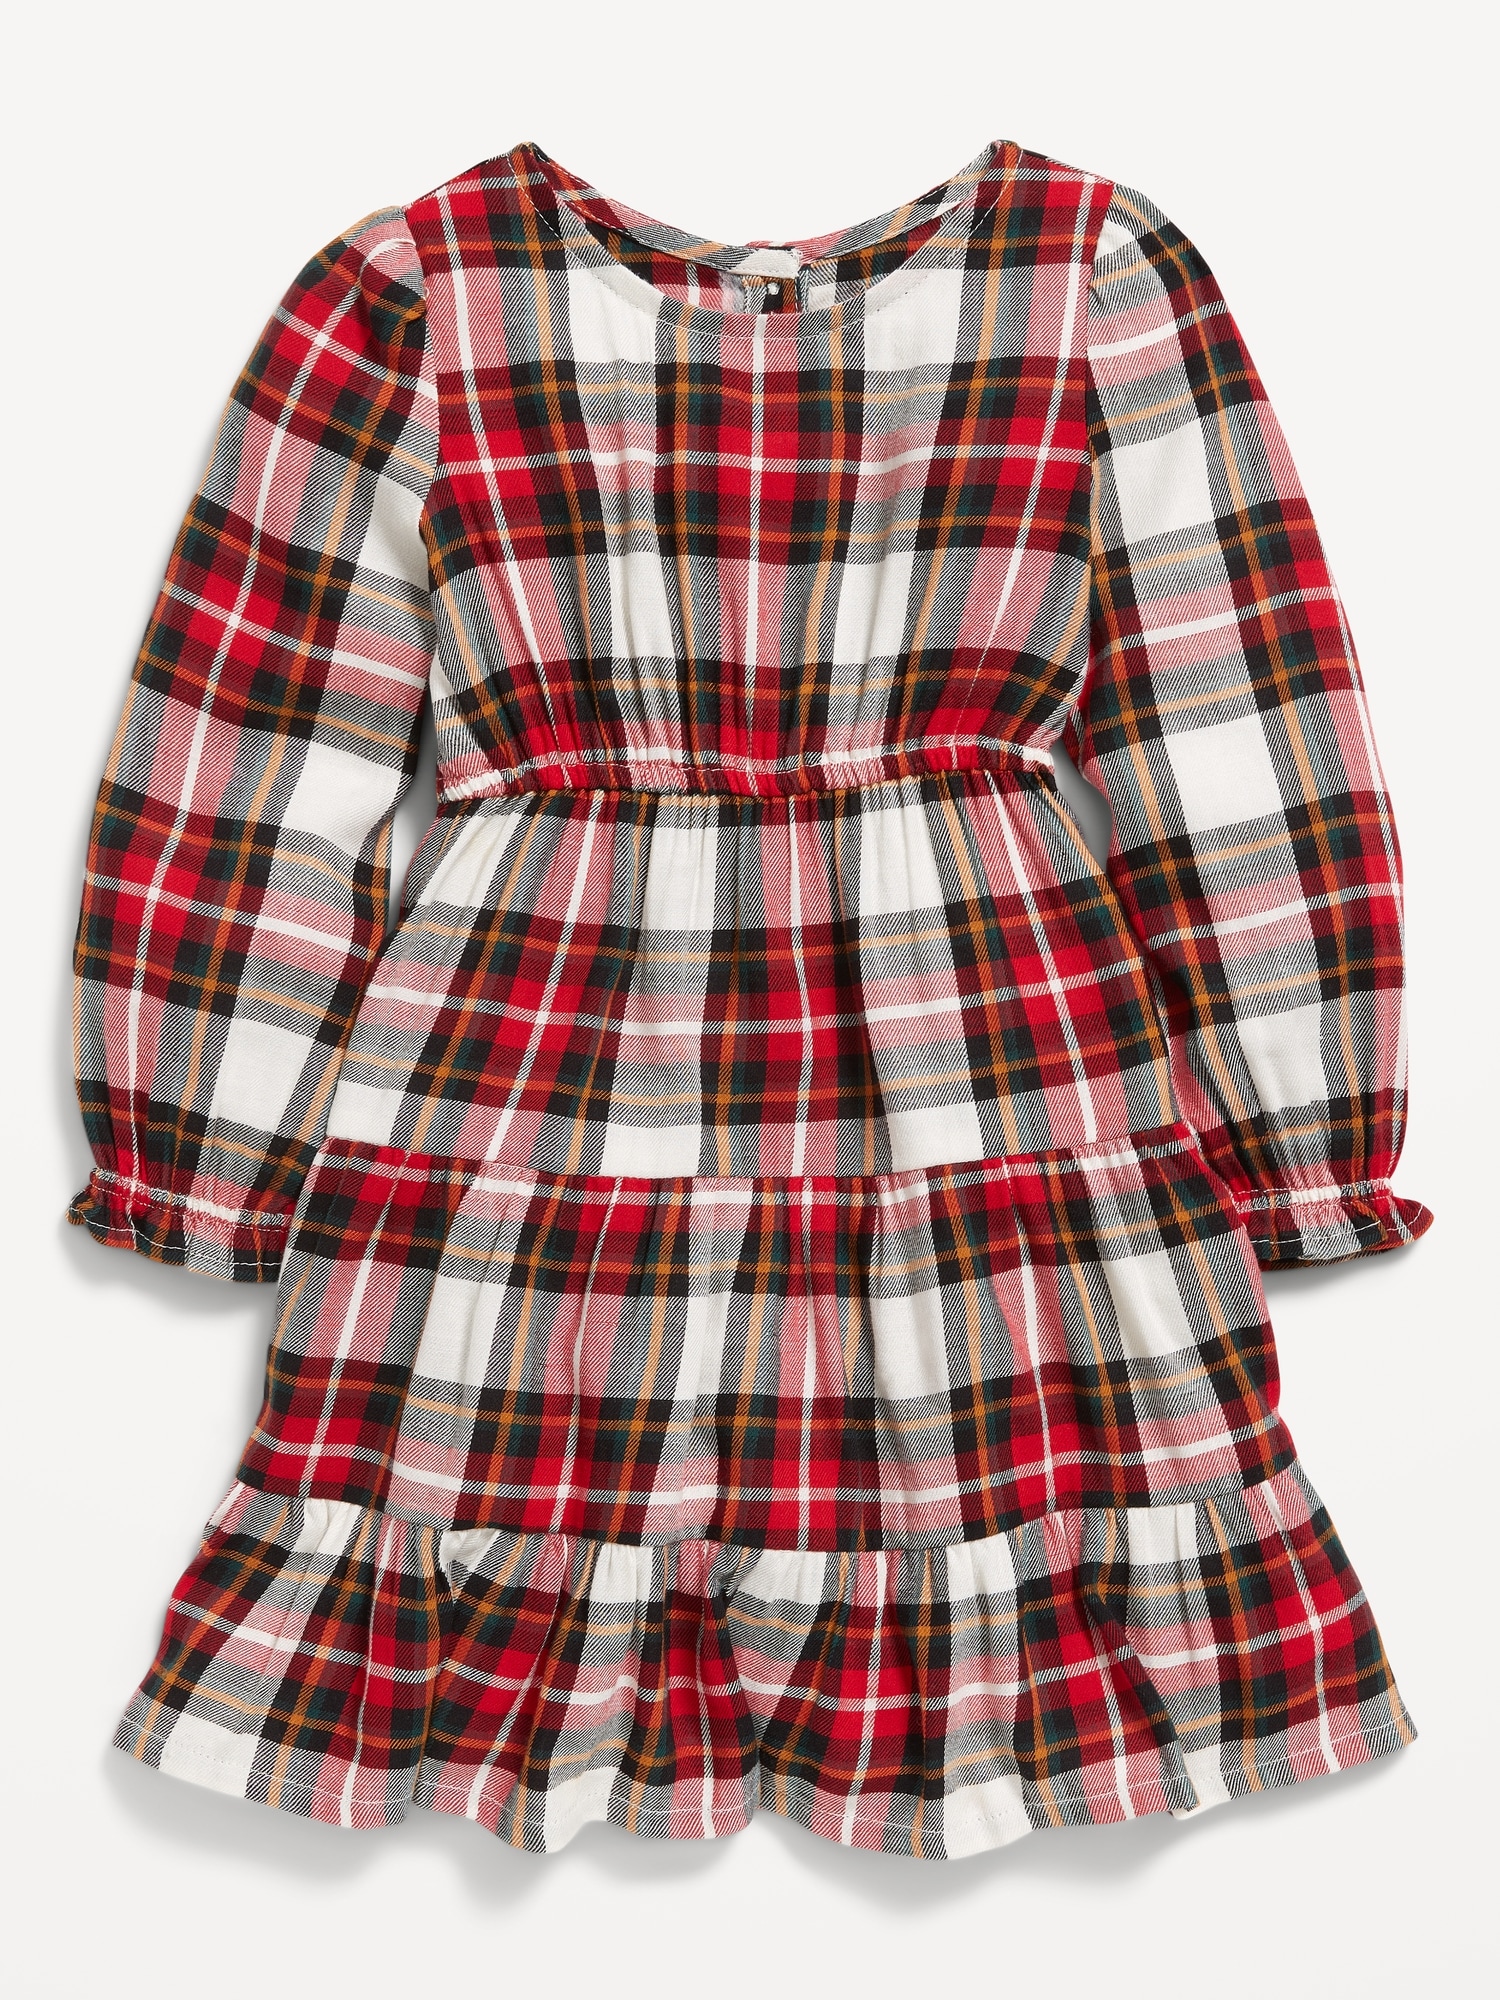 Long-Sleeve Plaid Tiered Dress for Toddler Girls